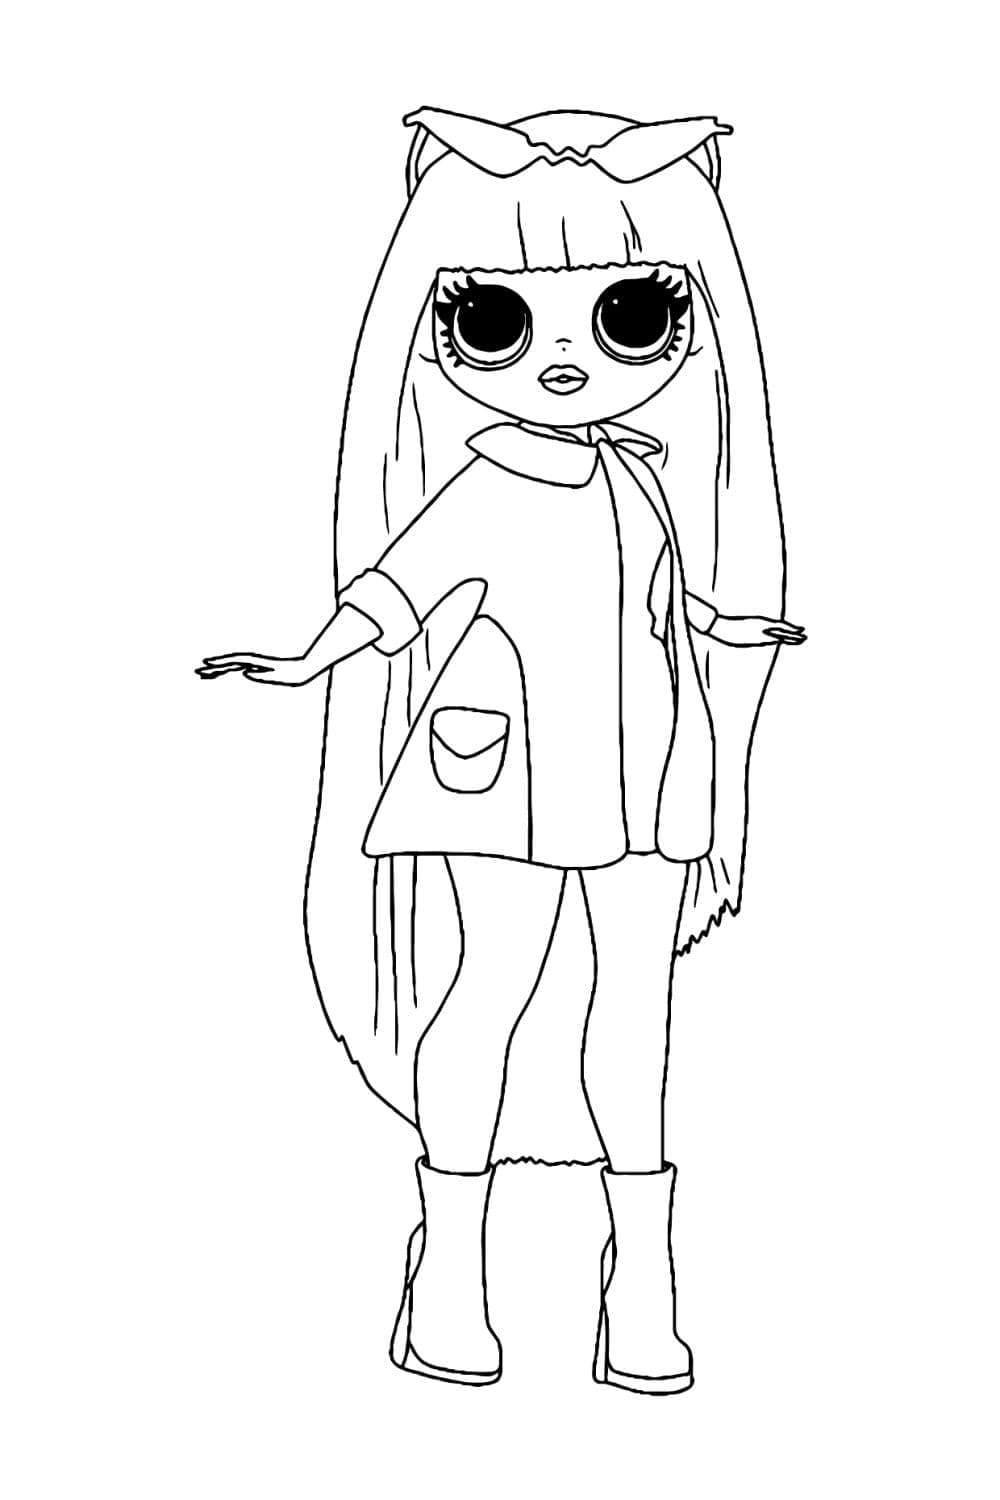 LOL OMG Groovy Baby Girl Image Coloring Page